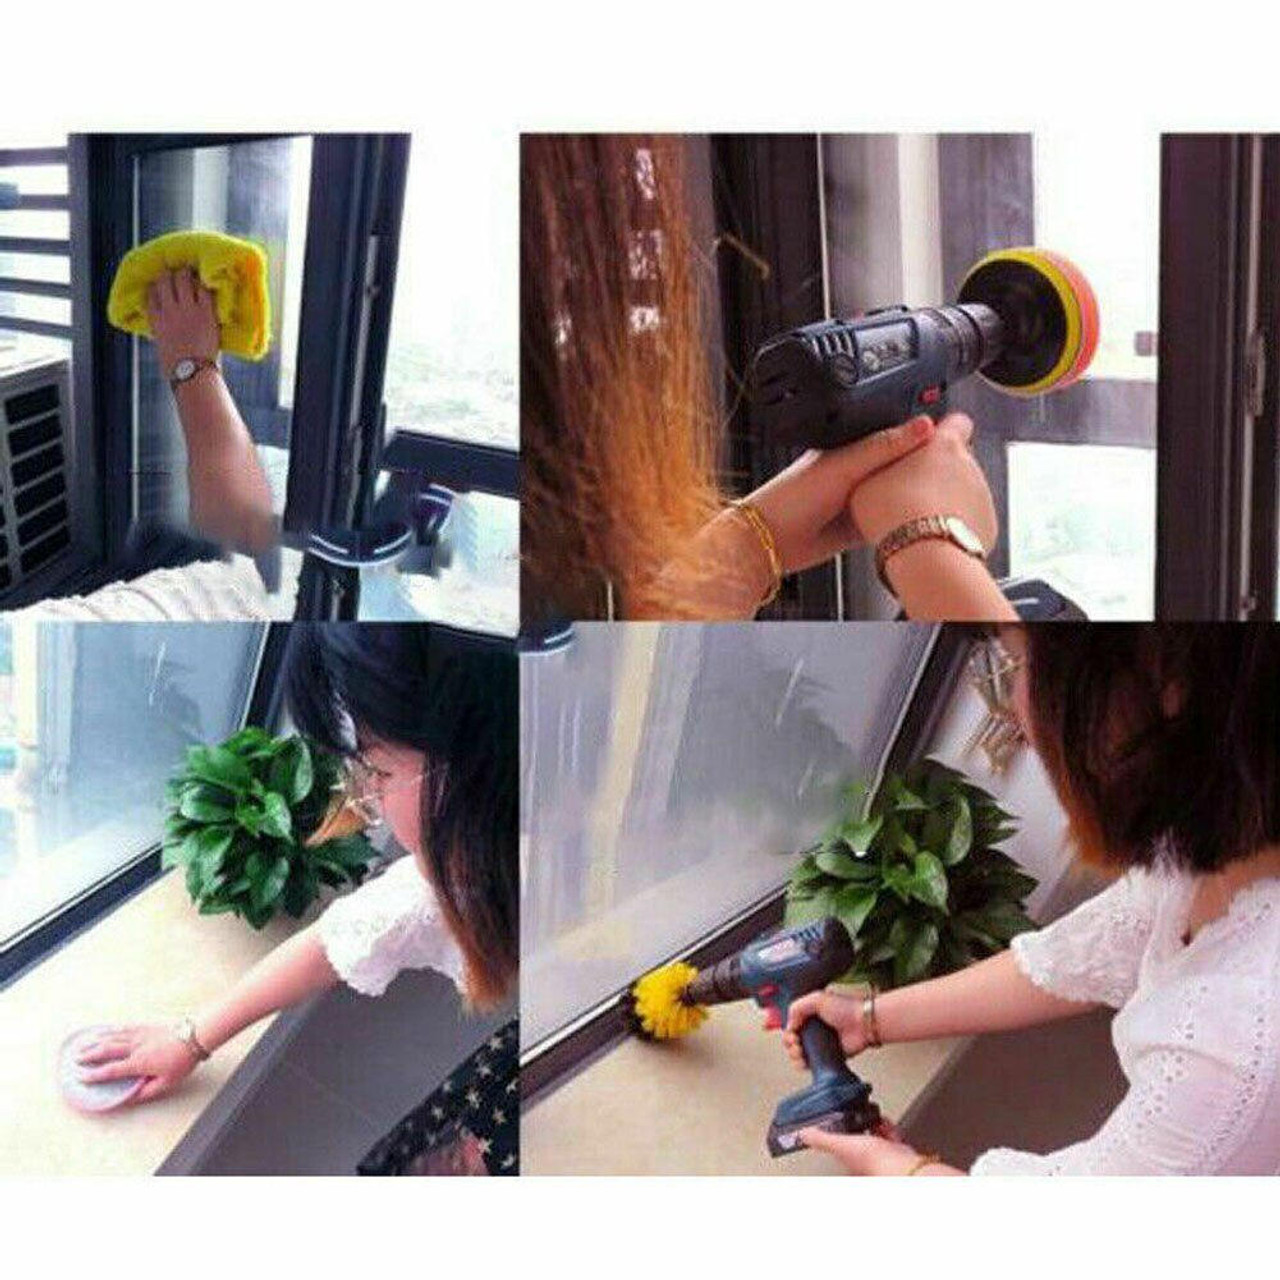 https://cdn11.bigcommerce.com/s-zrh8tkpr8d/images/stencil/1280x1280/products/10076/31209/1221-pcs-electric-drill-brush-attachment-set-cleaning-kit-power-scrubber-pads__04498.1675296151.jpg?c=2&imbypass=on